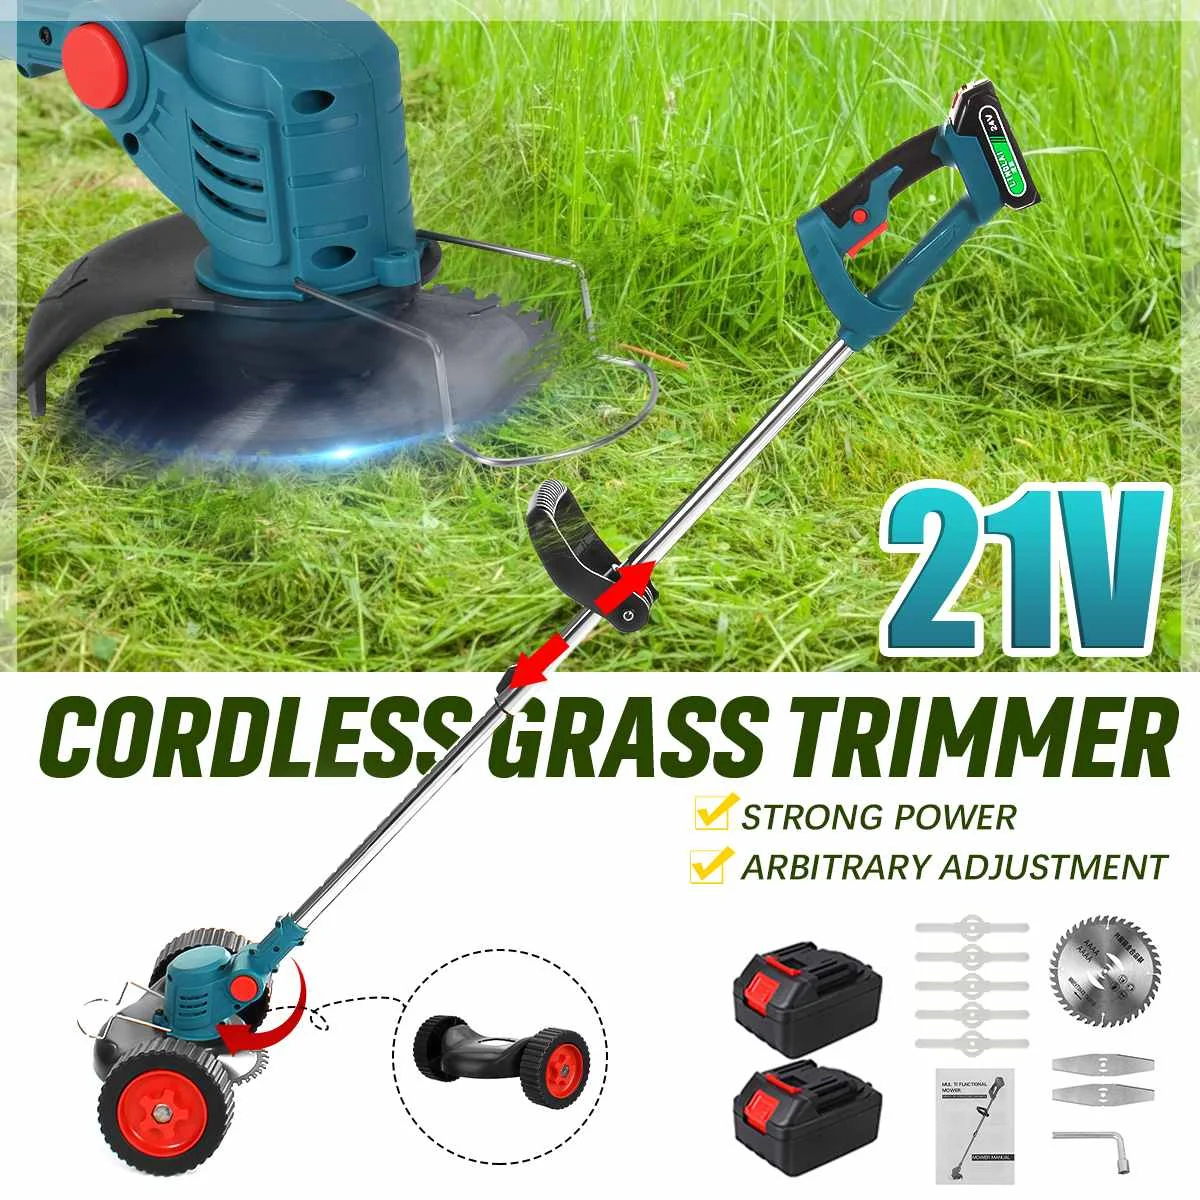 15000MAH Electric Grass Trimmer Cordless Power Lawn Mower For Makita Battery Hedge Trimmer Length Adjustable Garden Pruning Tool